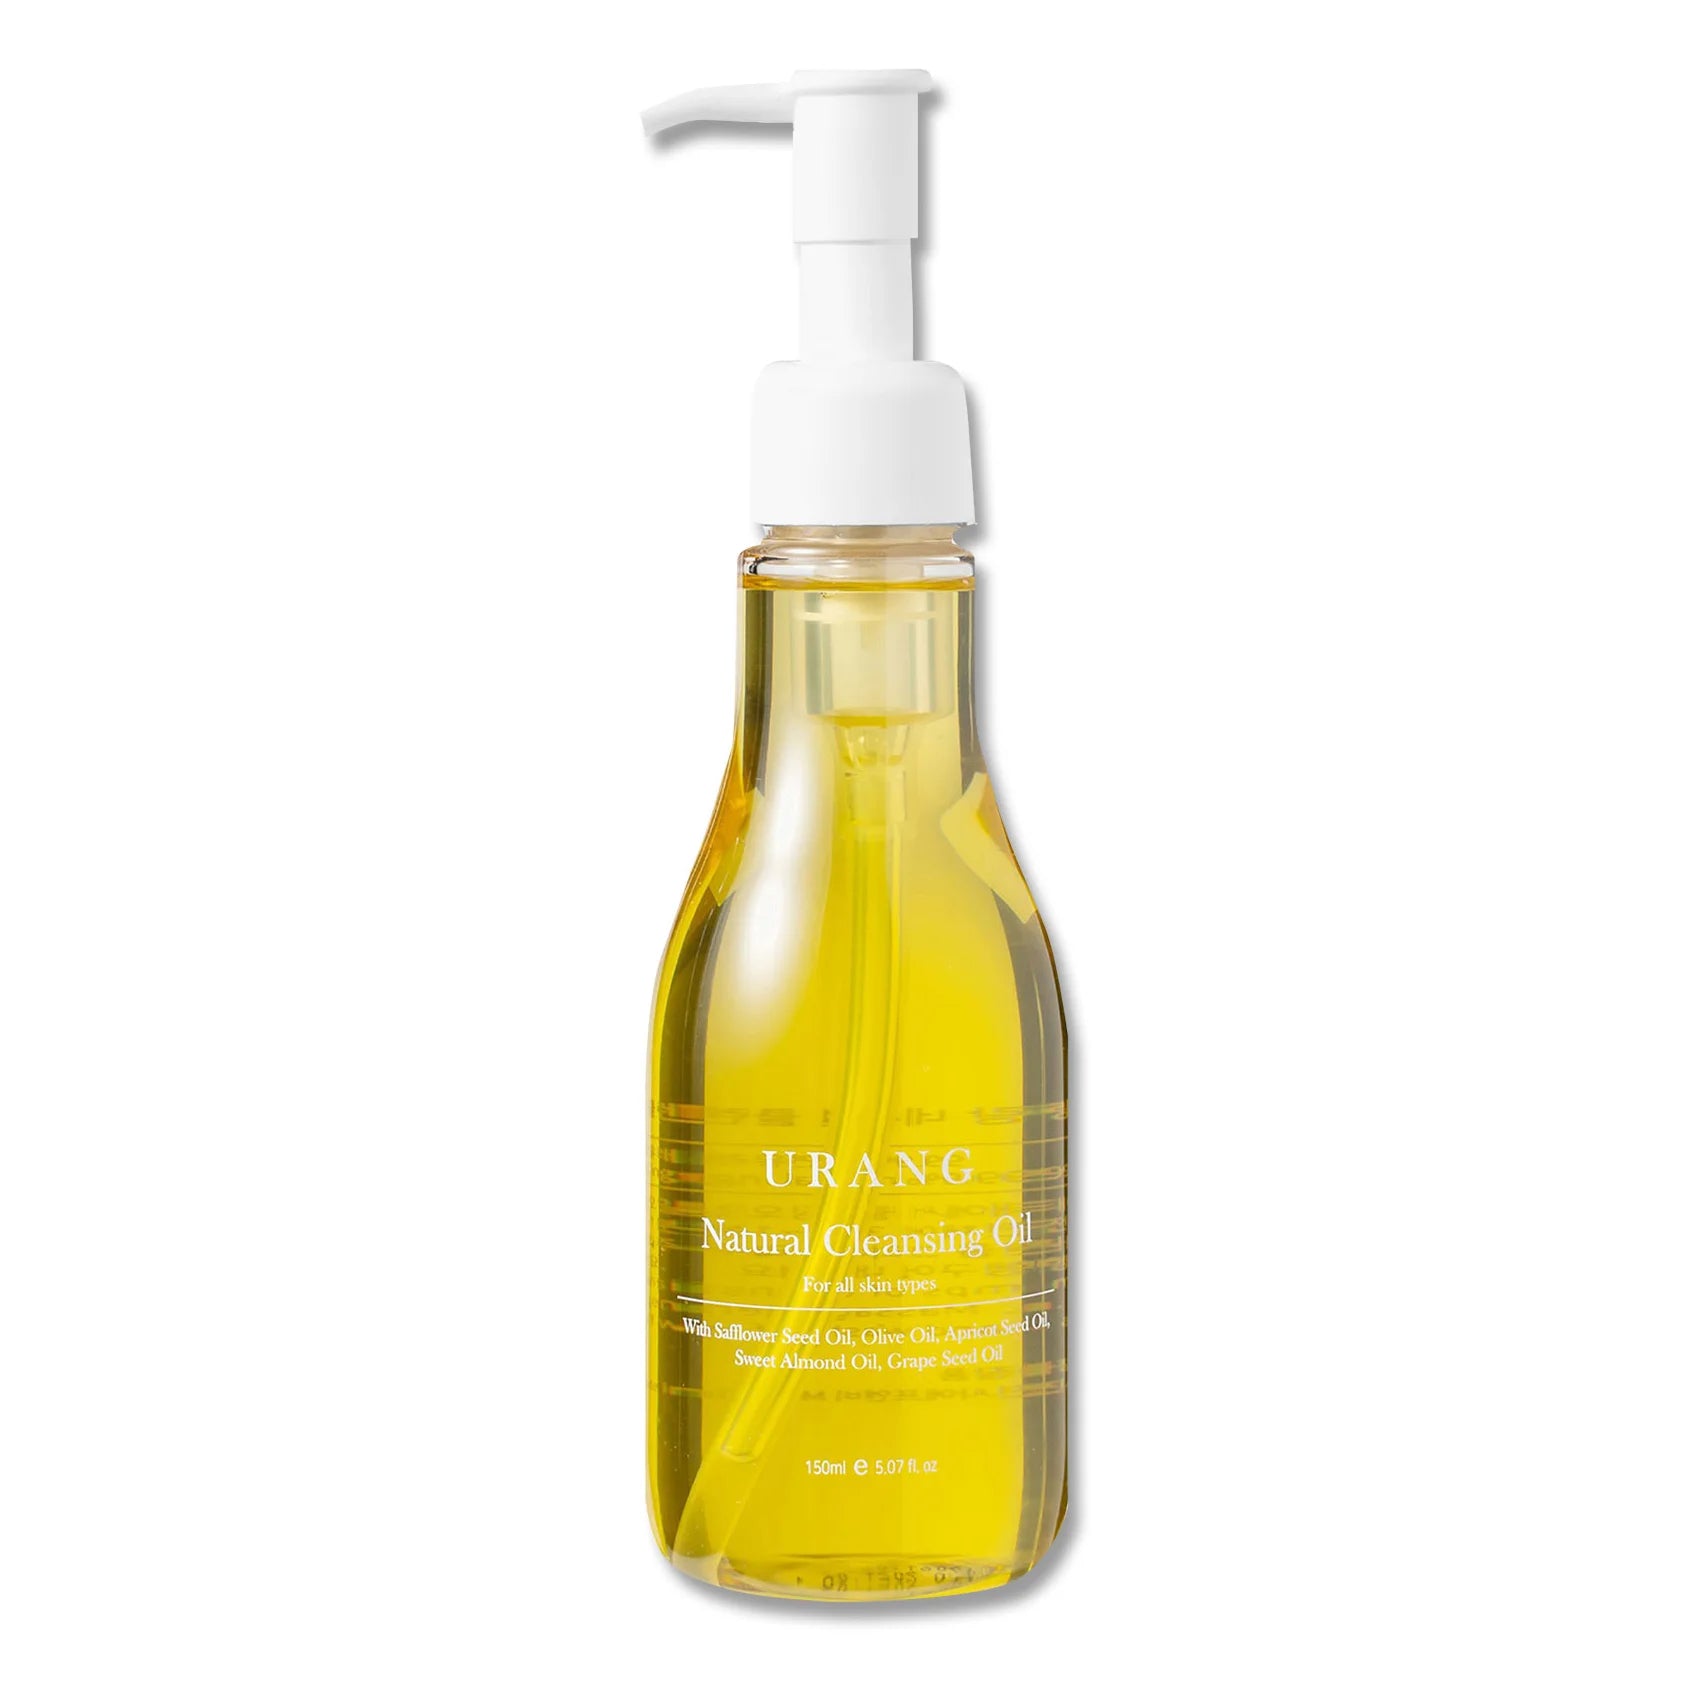 Urang Natural Cleansing Oil Face Cleanser Makeup Remover Organic Skincare K Beauty World 